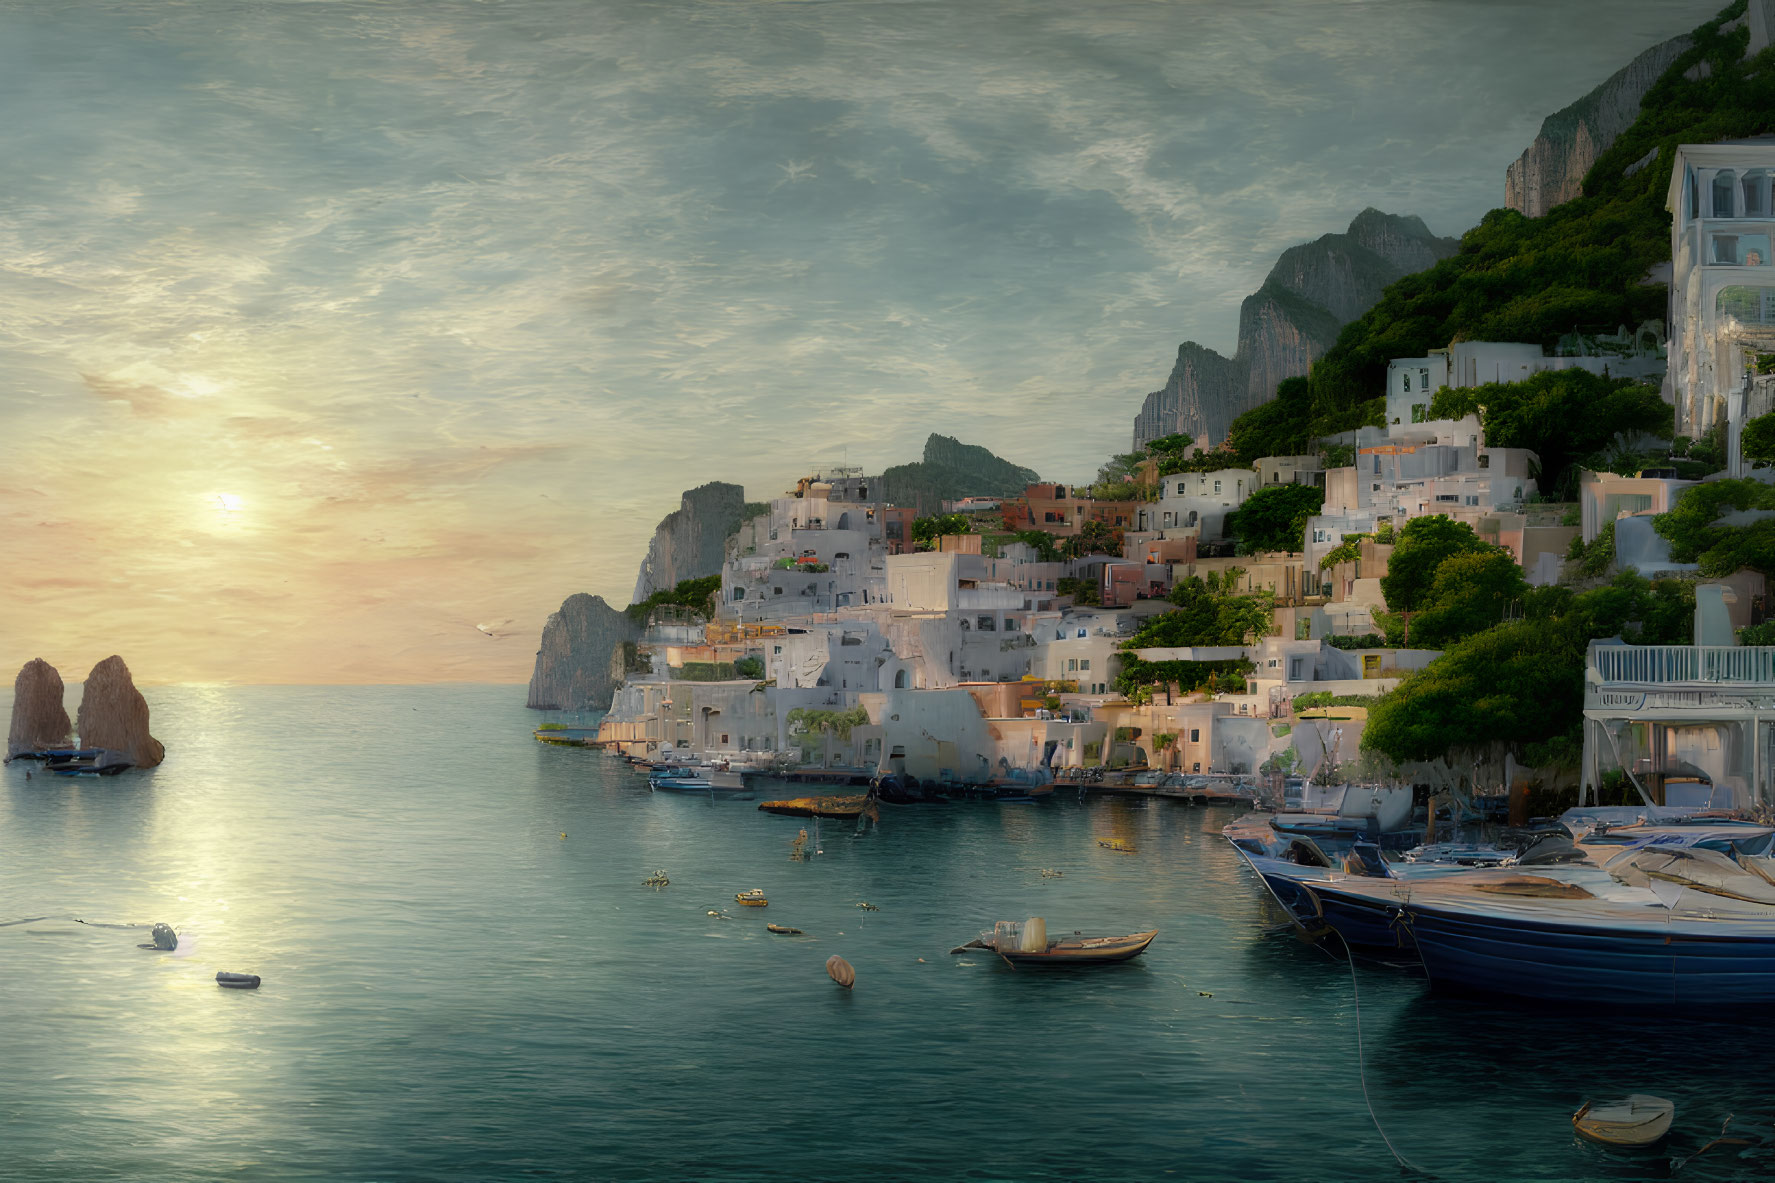 Coastal village sunset scene with white buildings, boats, and cliffs